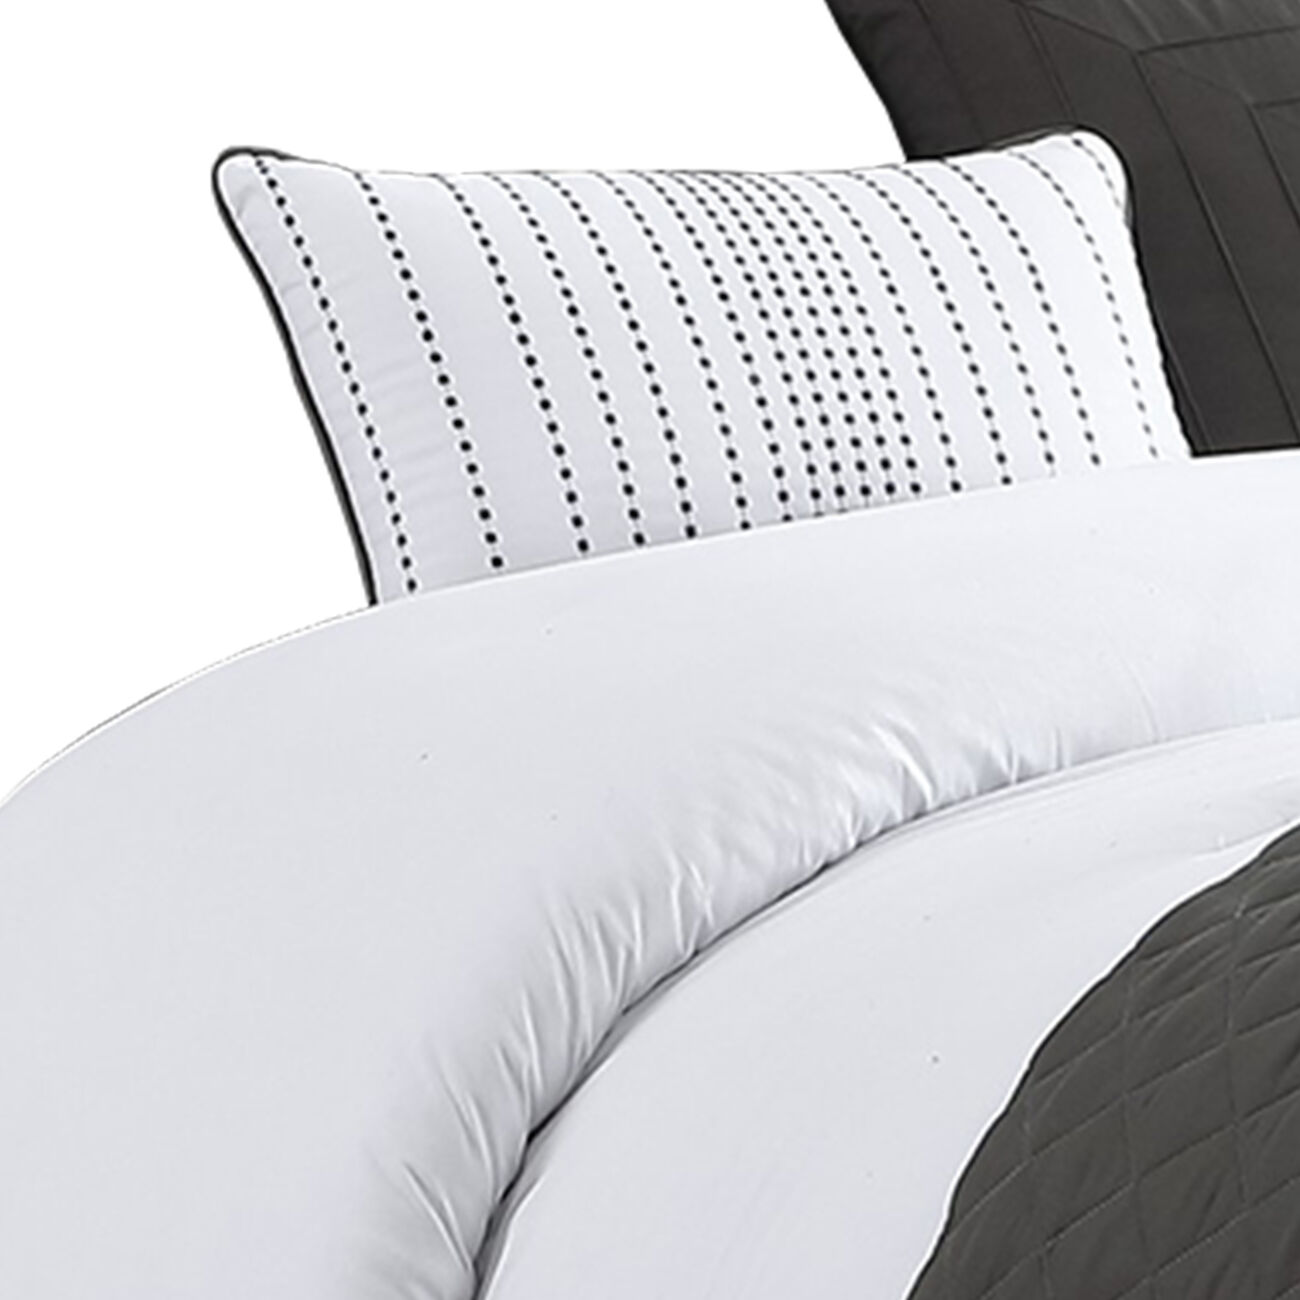 8 Piece King Size Fabric Comforter Set with Oversized Check Prints, Black